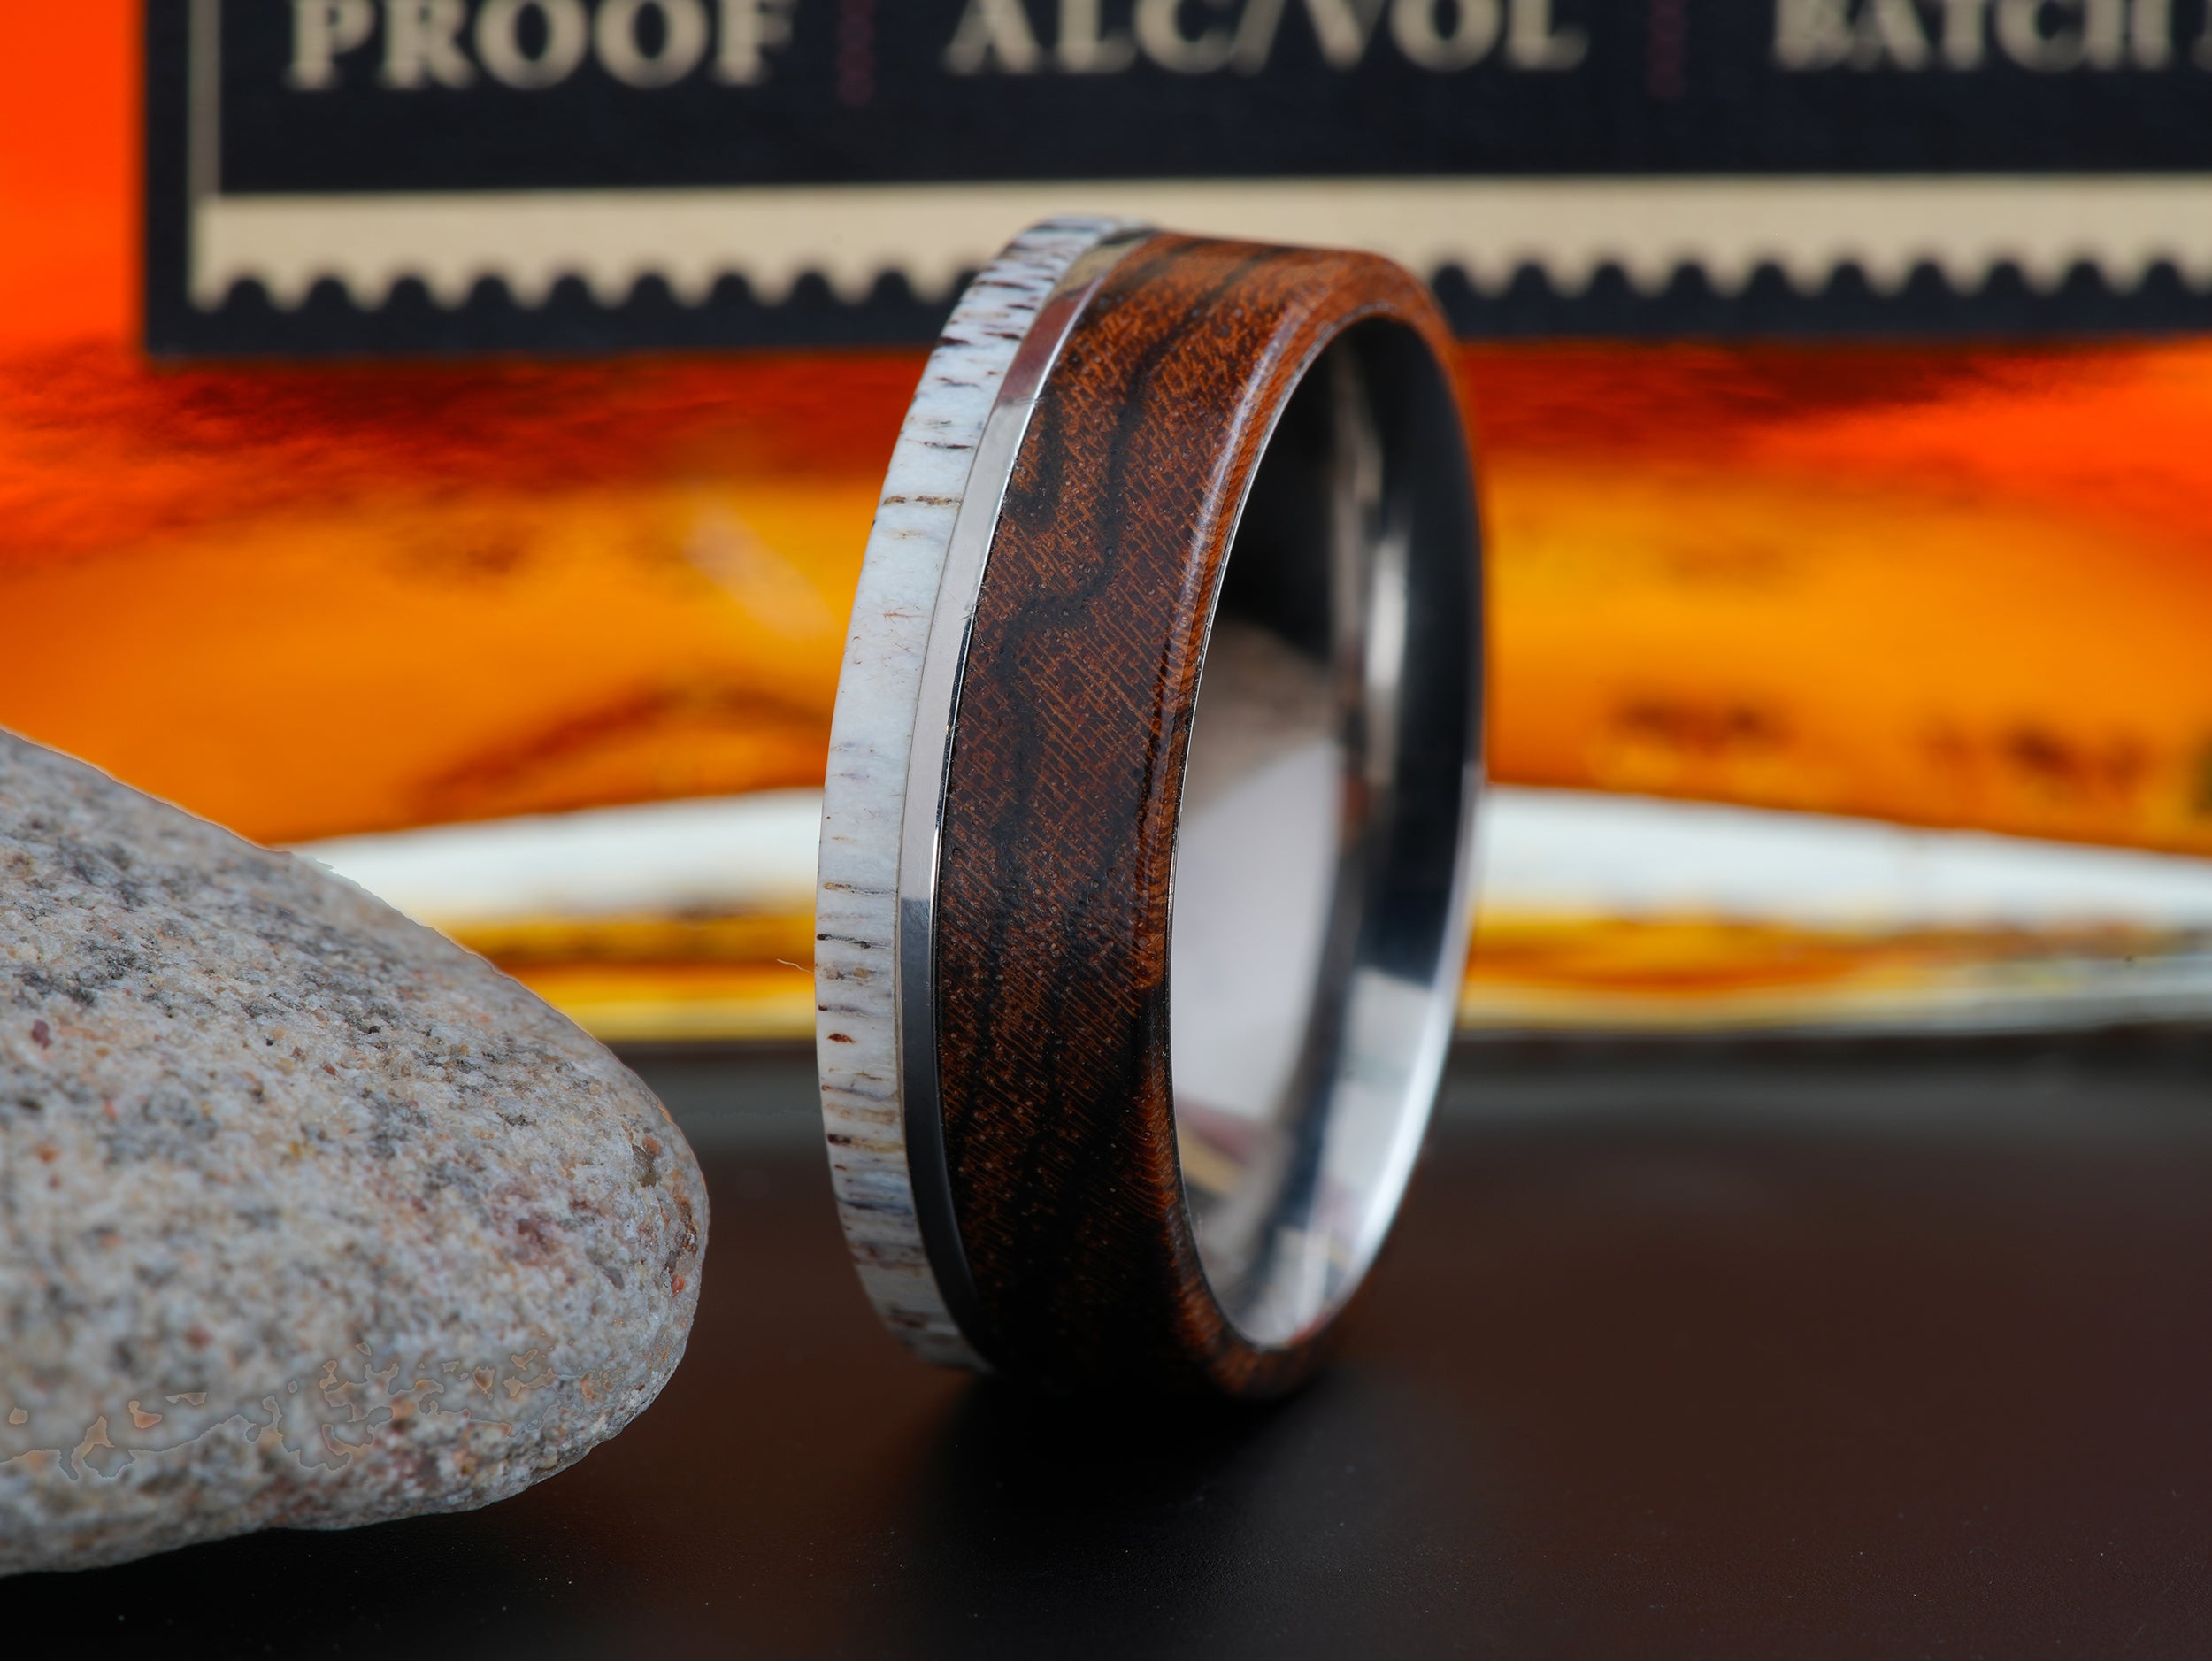 The Bocote | Titanium Ring with Bocote Wood and Deer Antler